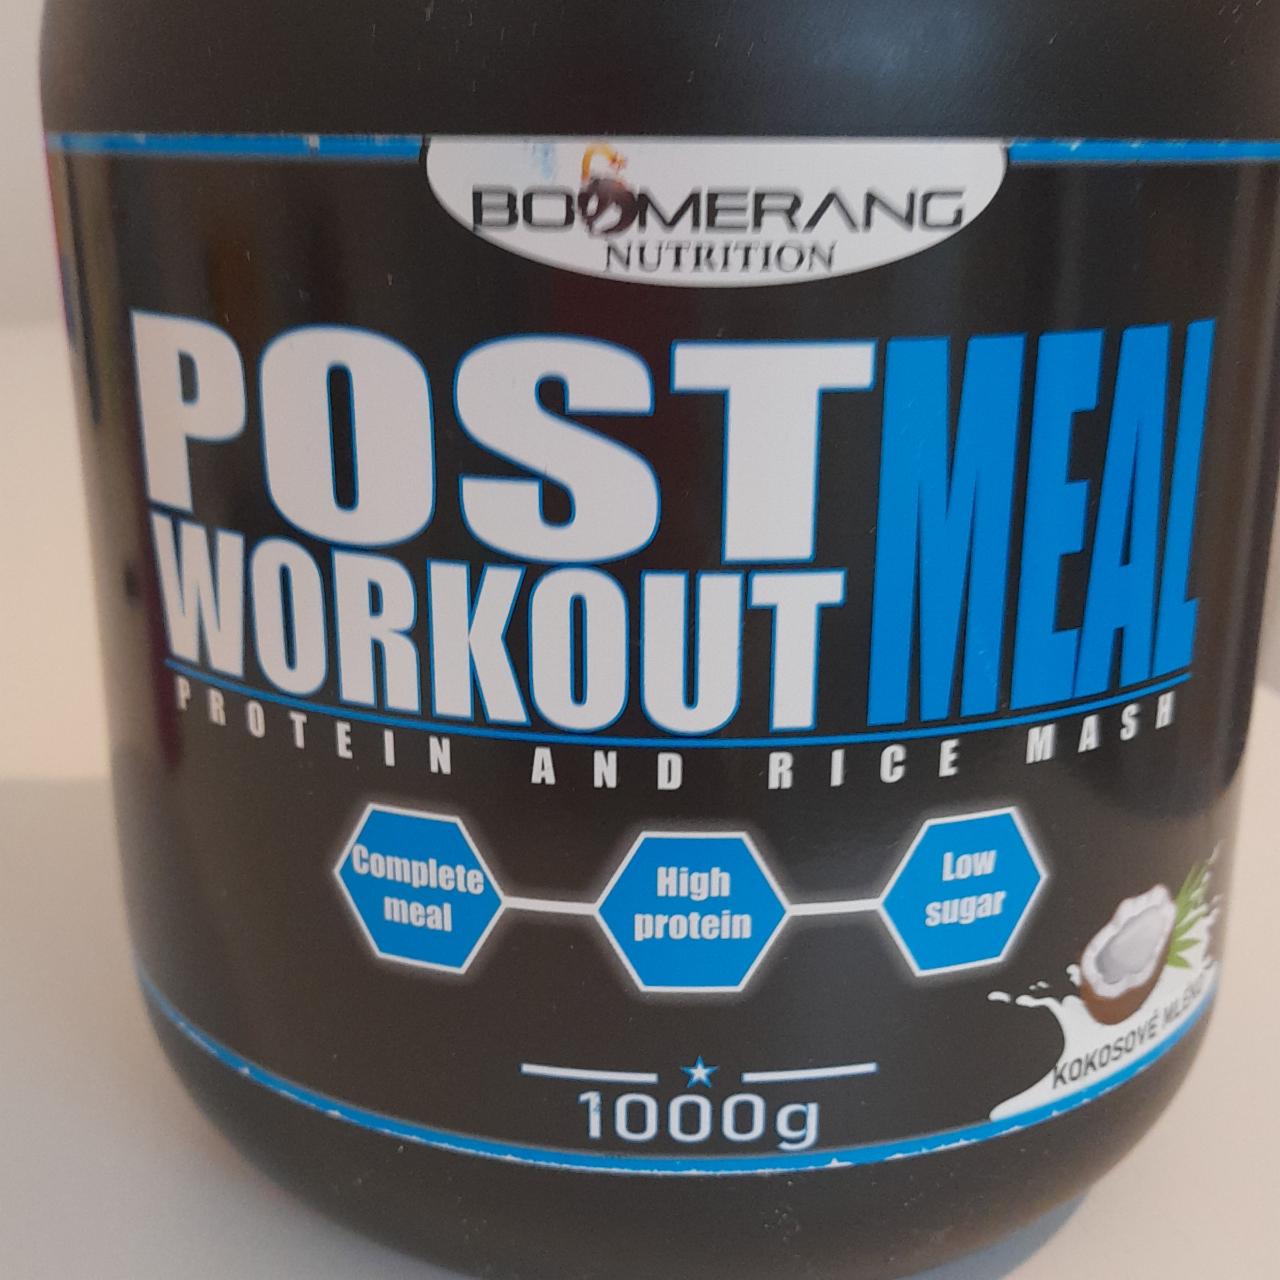 Fotografie - Post workout meal protein and rice mash Boomerang Nutrition